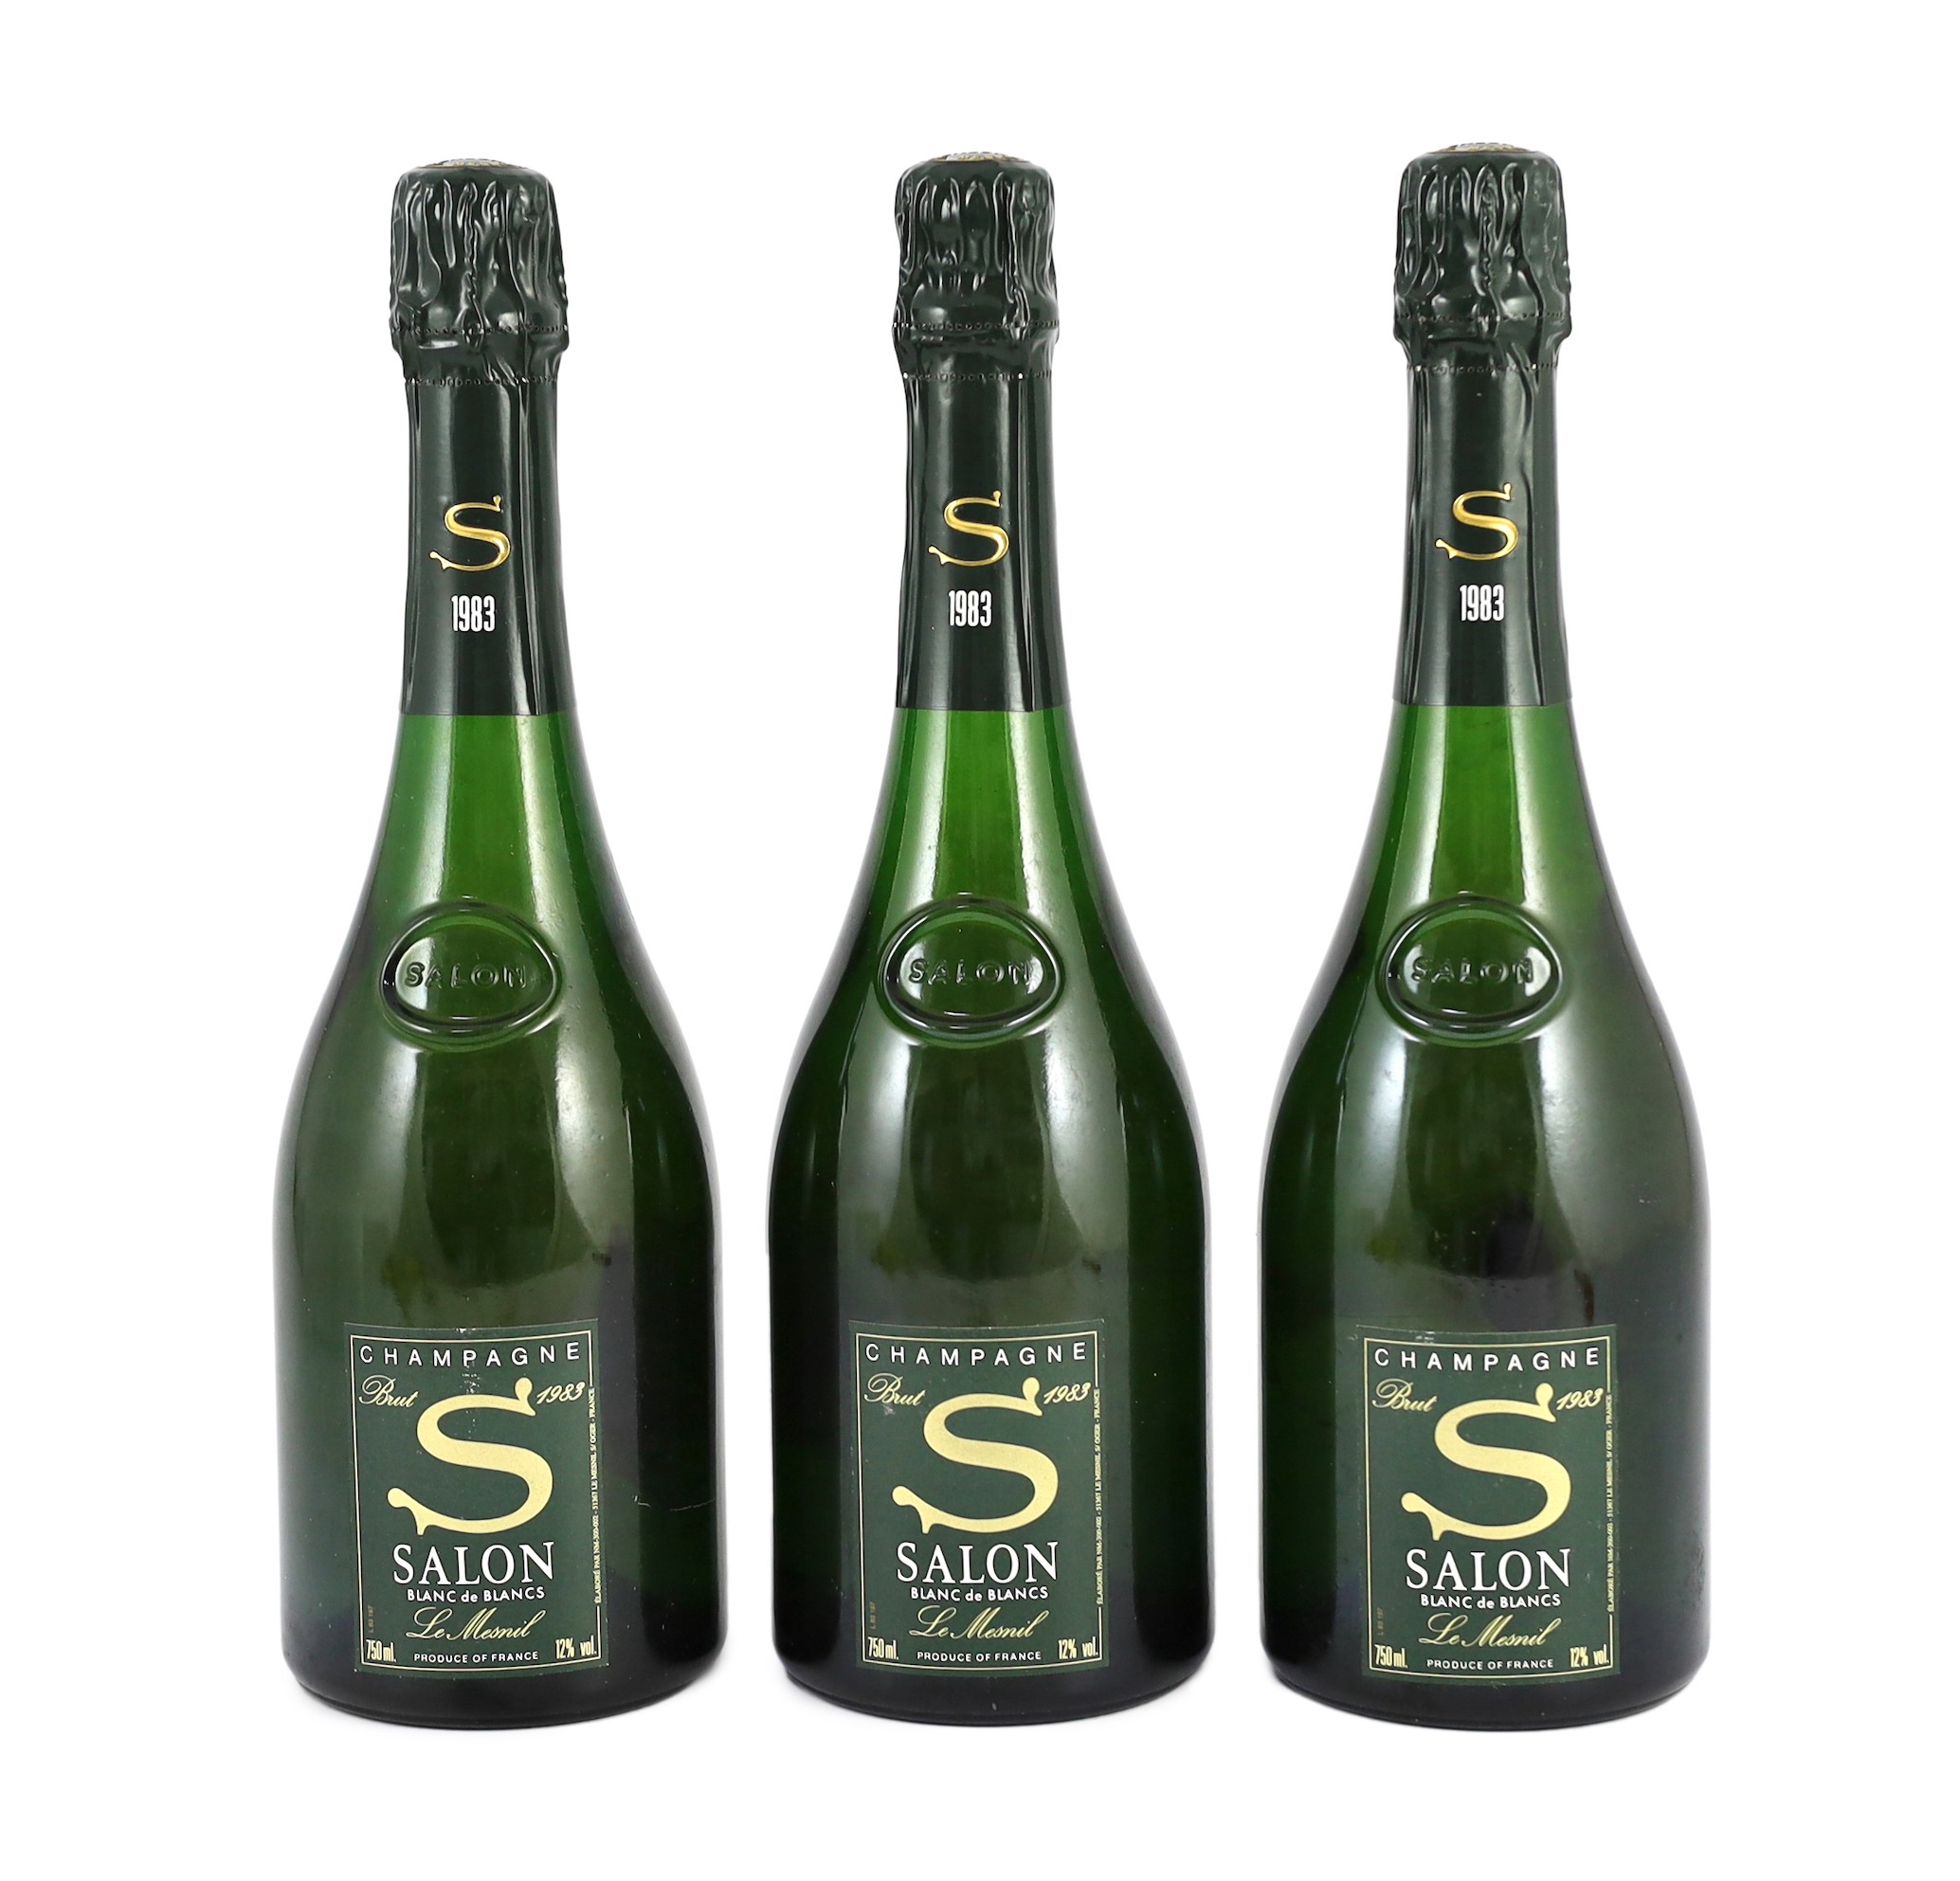 Three bottles of 1983 'Salon' champagne in original boxes                                                                                                                                                                   